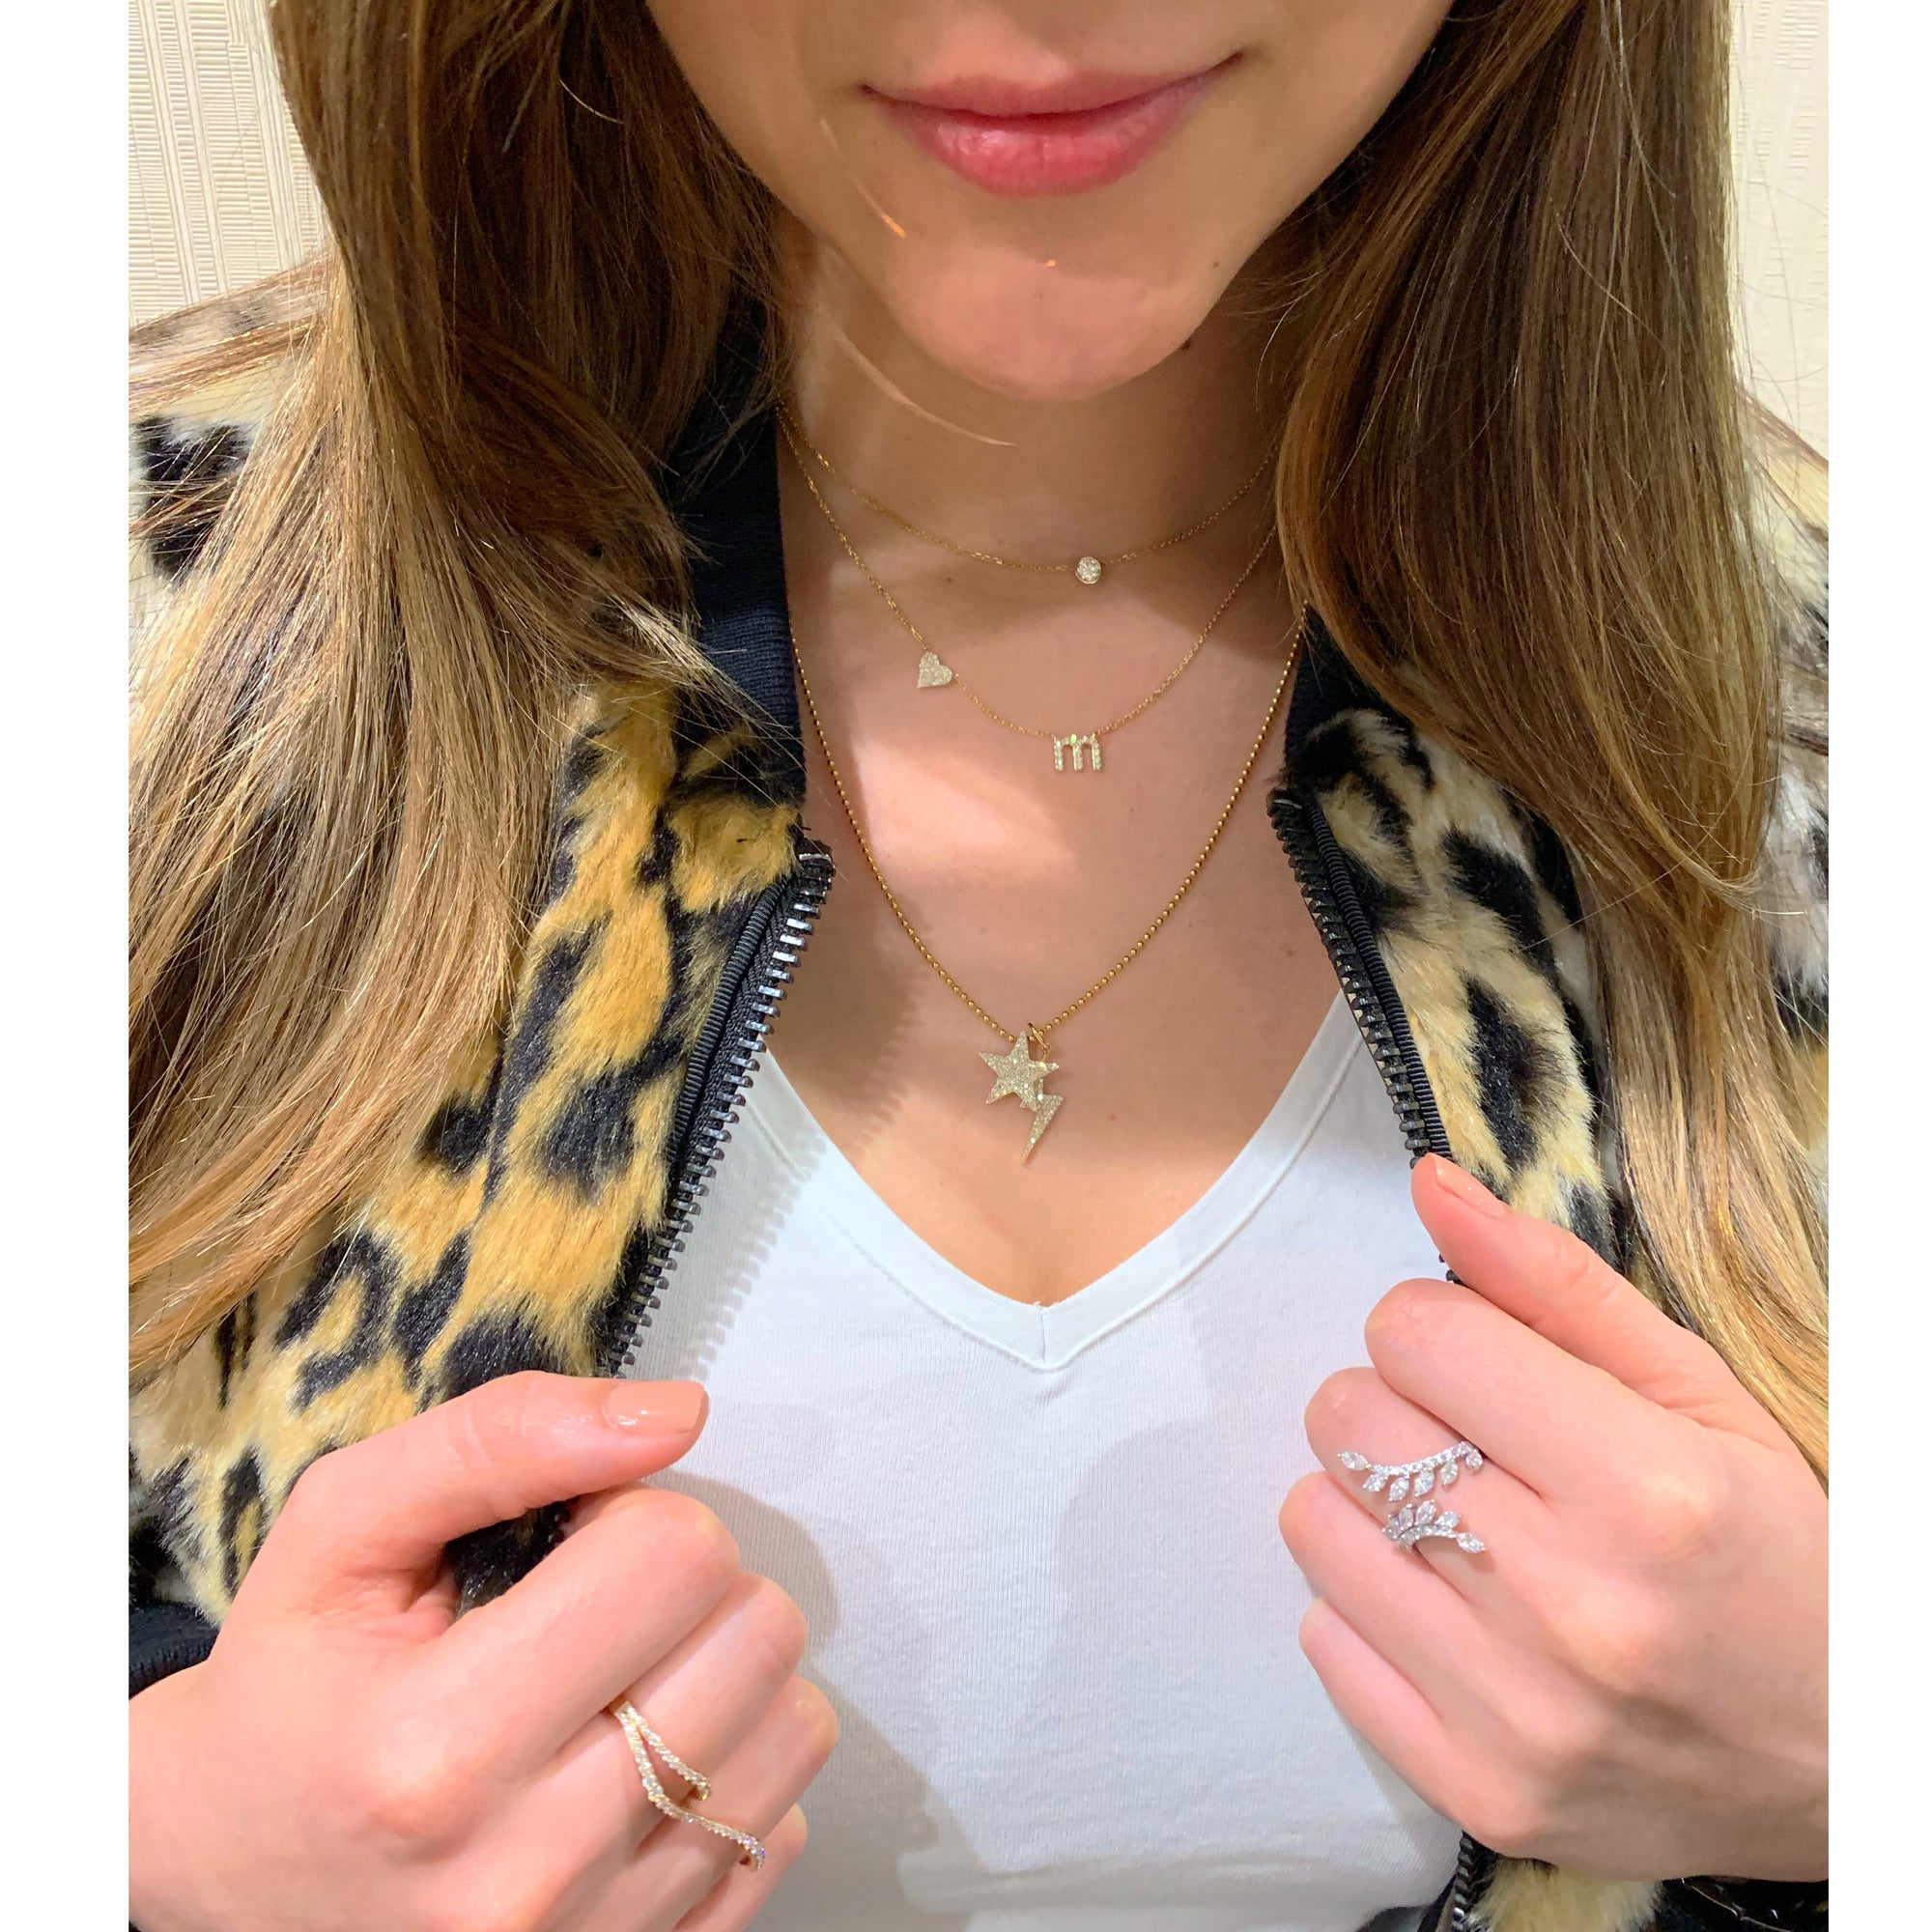 Items sold separately.  Diamond Star & Lightning Bolt Pendants  -0.31 total carat weight (star) set in 14kt gold weighing 0.74 grams  -0.25 total carat weight (lightning bolt) set in 14kt gold weighing 0.76 grams  Available in yellow, white, and rose gold.